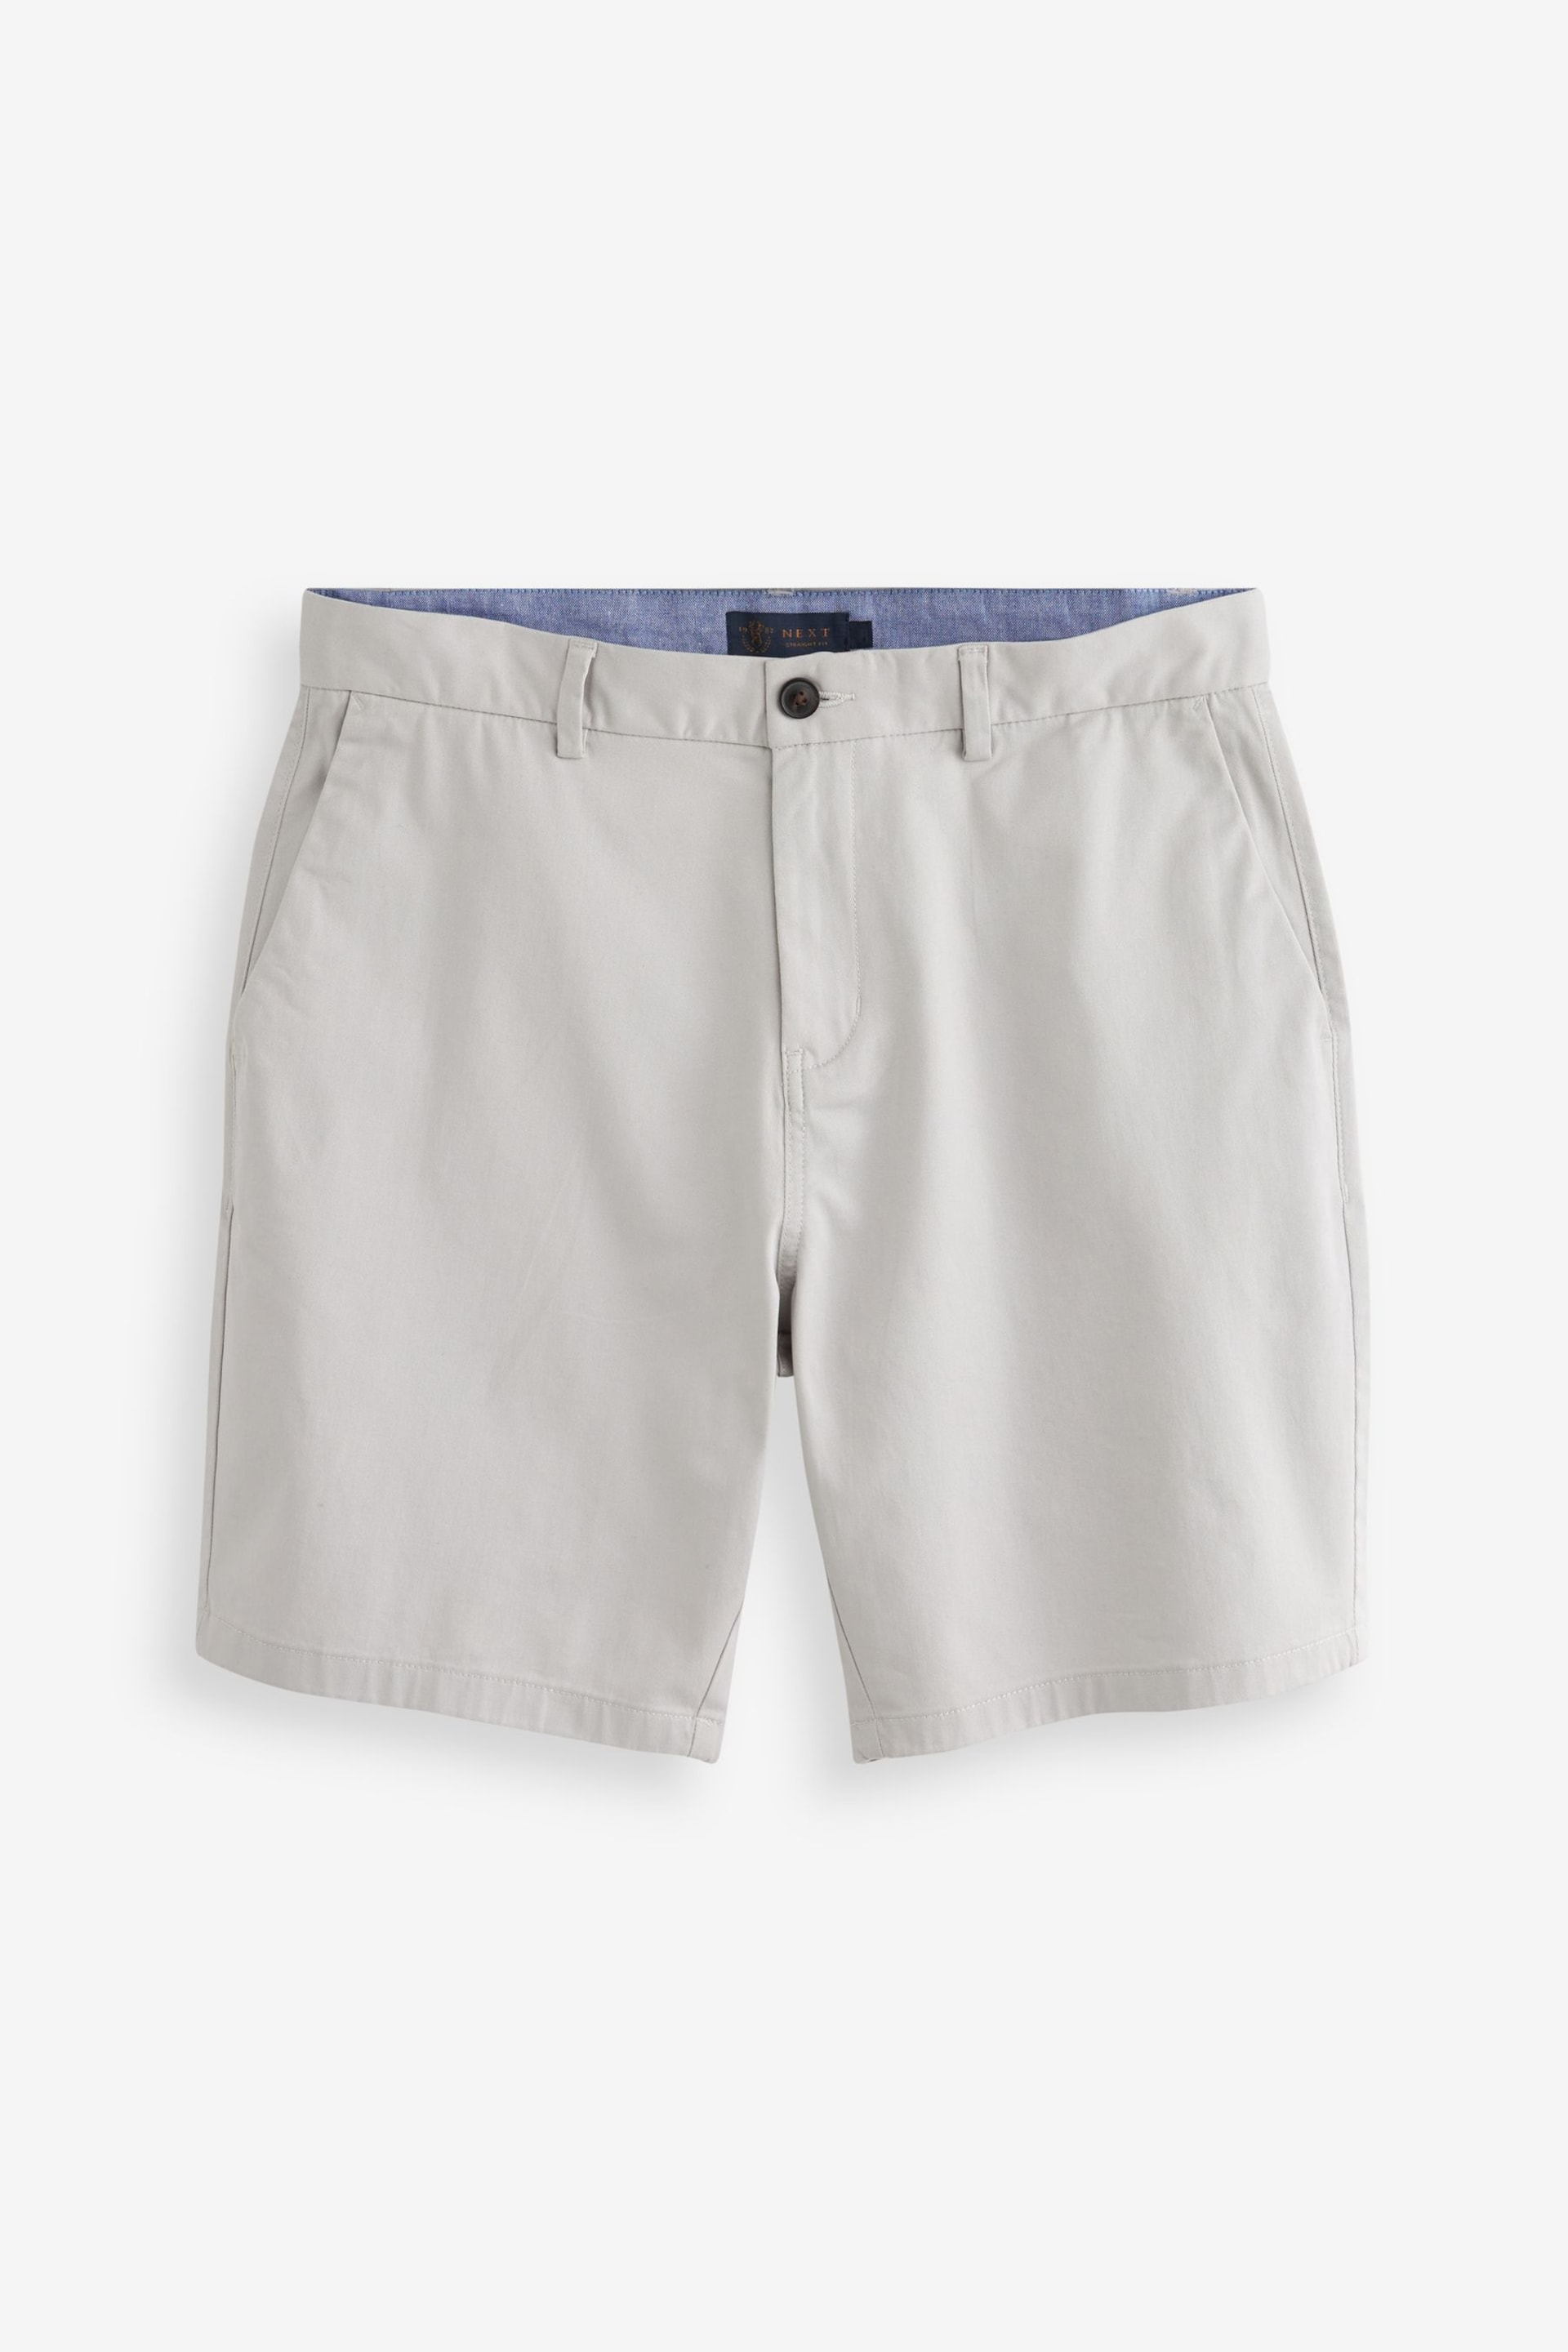 Navy Blue/Grey/Stone Straight Stretch Chinos Shorts 3 Pack - Image 4 of 11